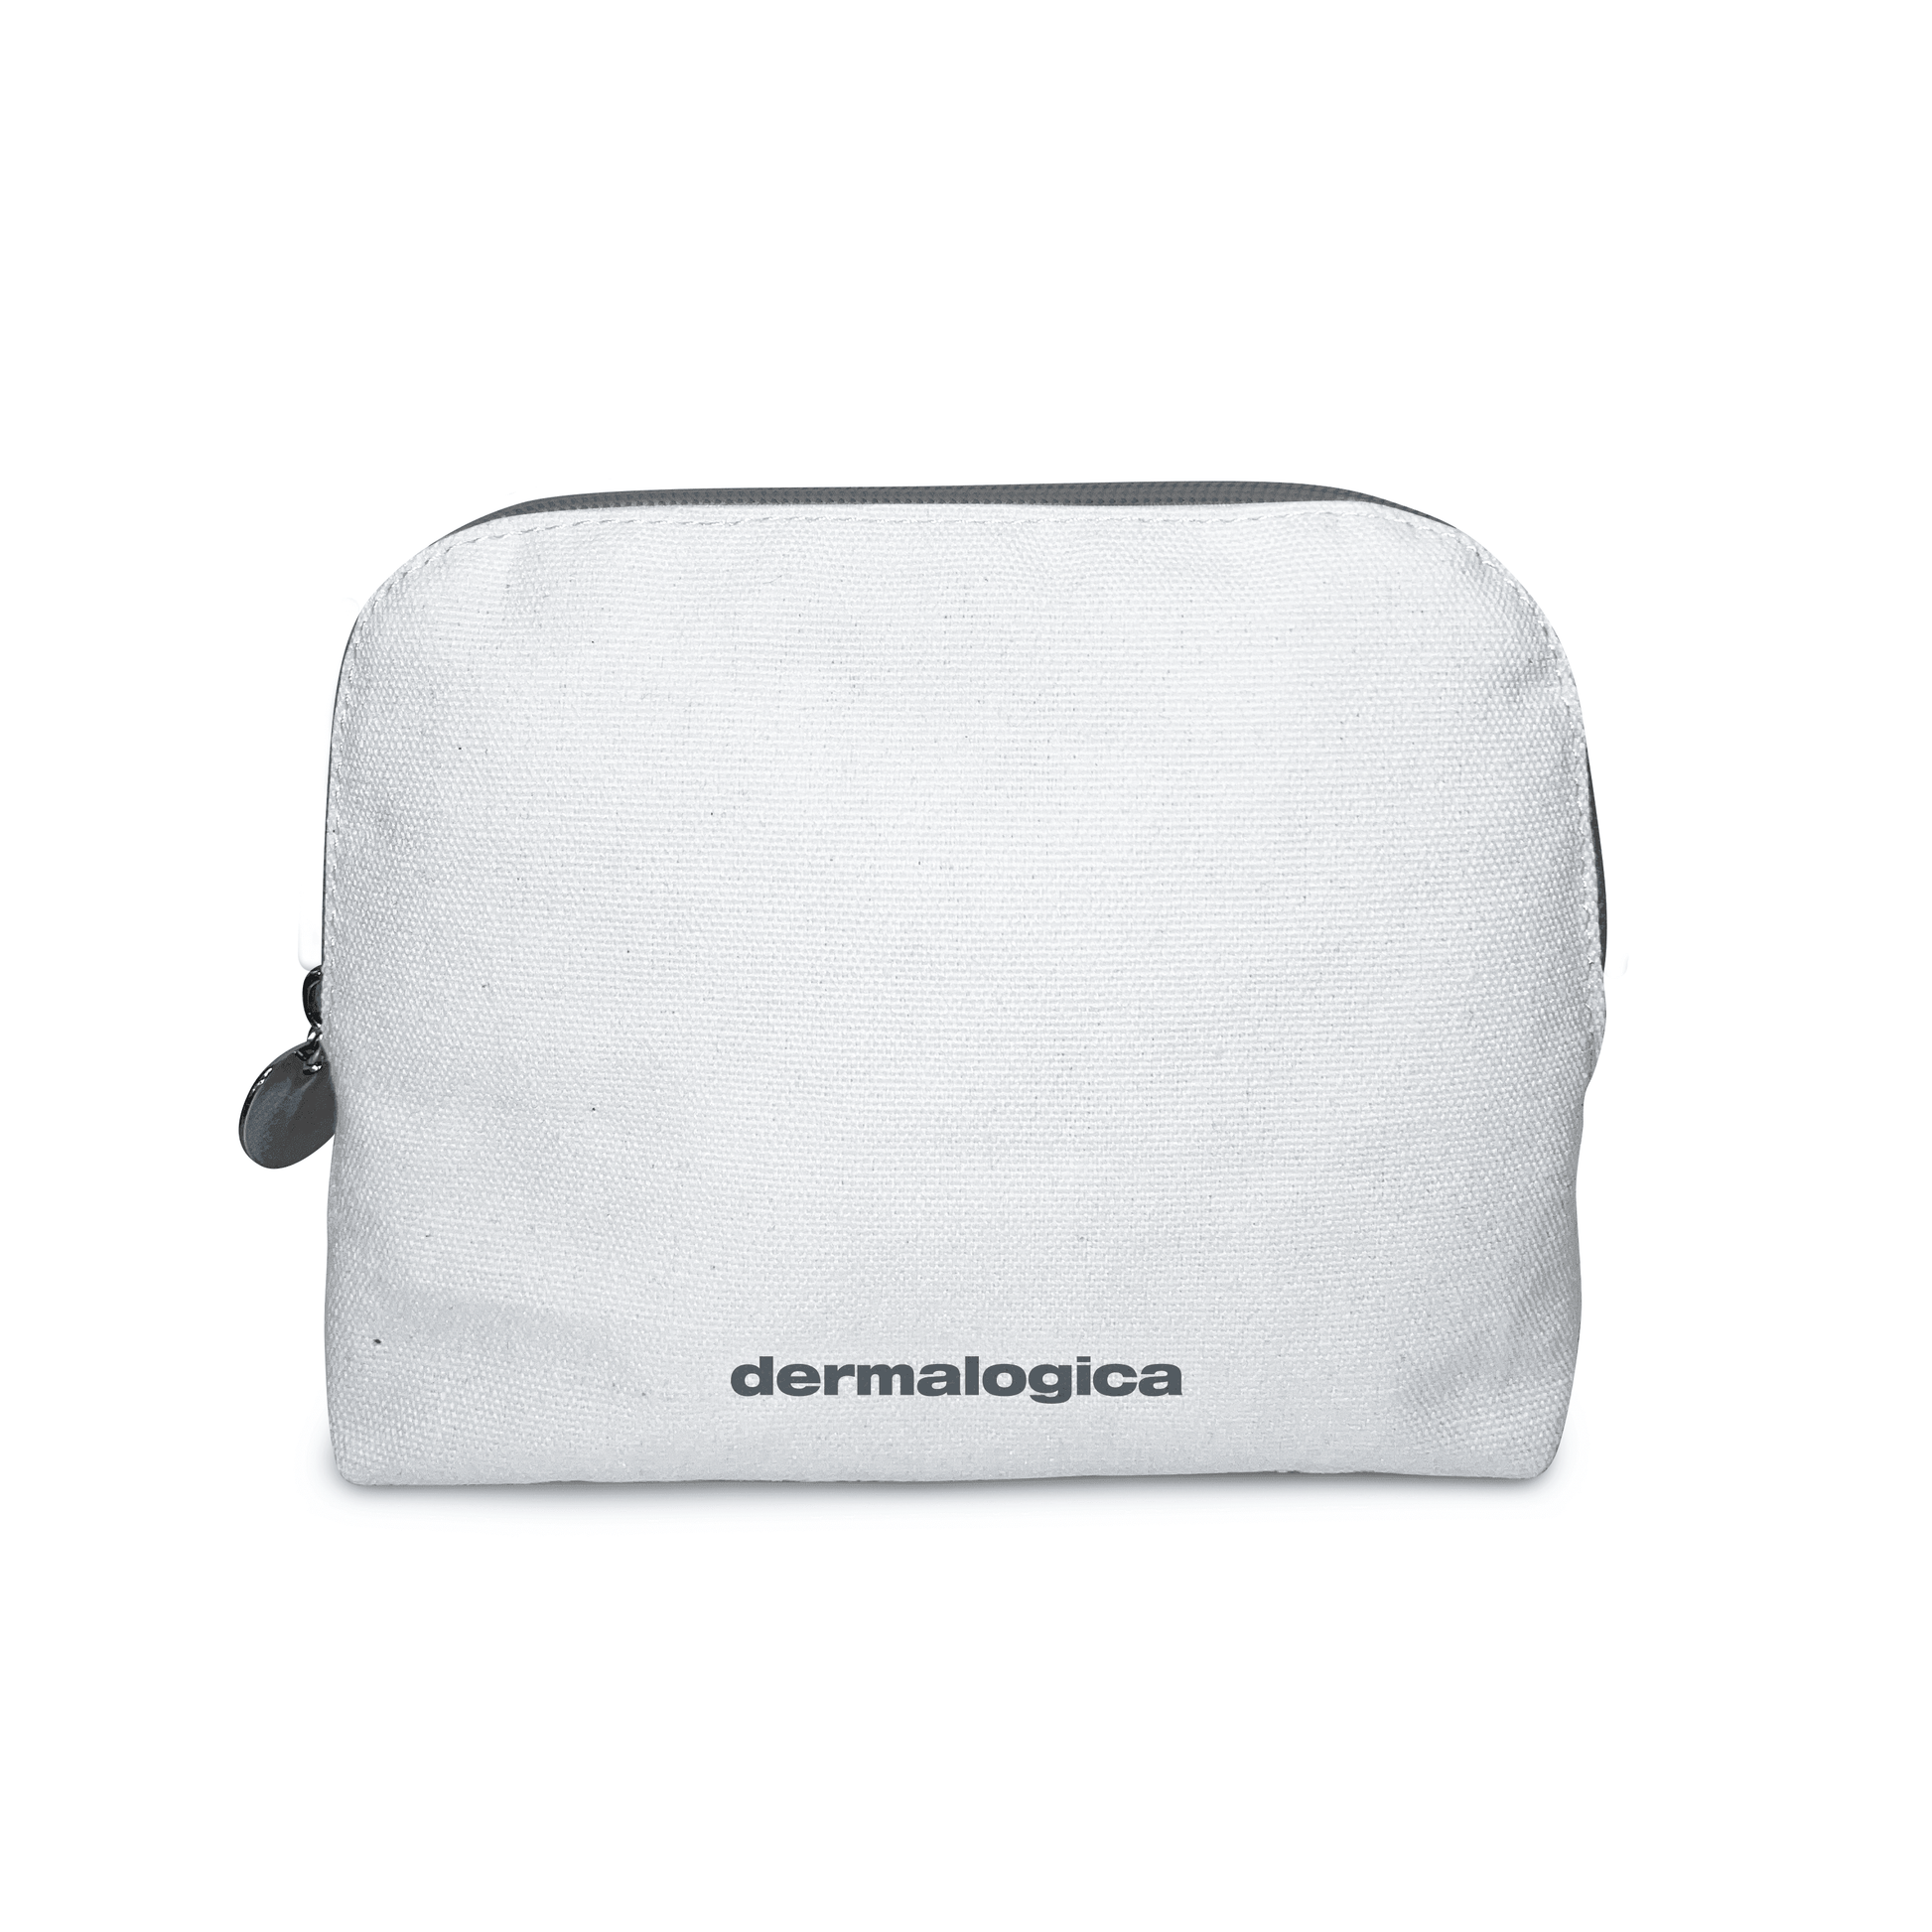 Dermalogica pouch with grey zip - Dermalogica Singapore